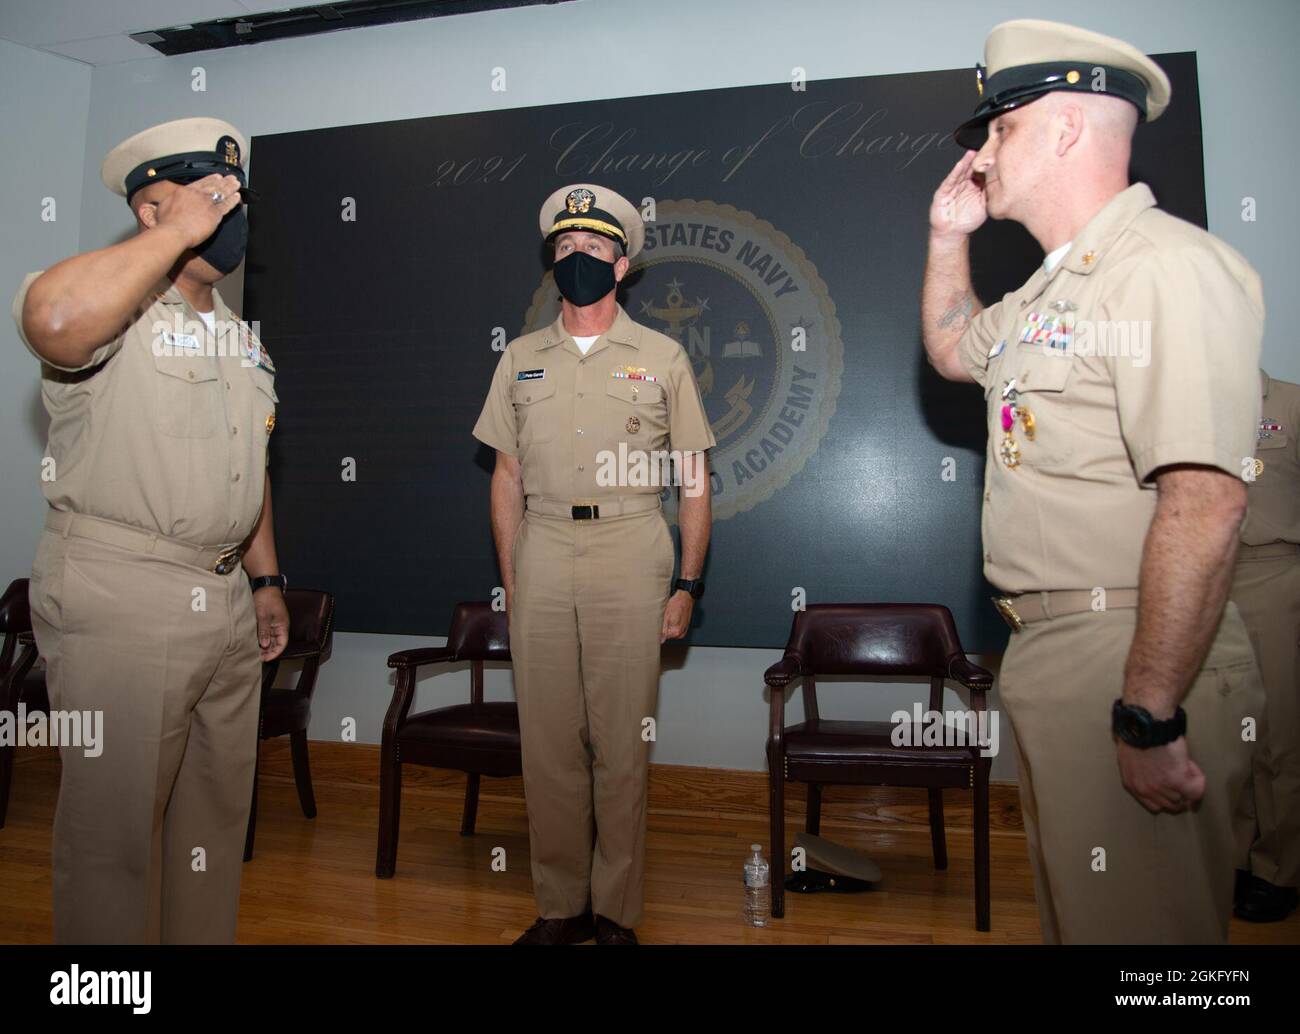 210412-N-EL867-0067 Newport, R.I. (April 12, 2021) Rear Adm. Pete Garvin, commander, Naval Education and Training Command (center), presides as Command Master Chief Jason Avin, right, is properly relieved by Command Master Chief Baron Randle, as the Senior Enlisted Academy director during their change of charge ceremony, April 12. The ceremony also celebrated the expansion of Tomich Hall, the main classroom dedicated to senior enlisted leaders to improve management, leadership, national security and physical fitness. Tomich Hall will now be able to accommodate 218 students per class increasing Stock Photo